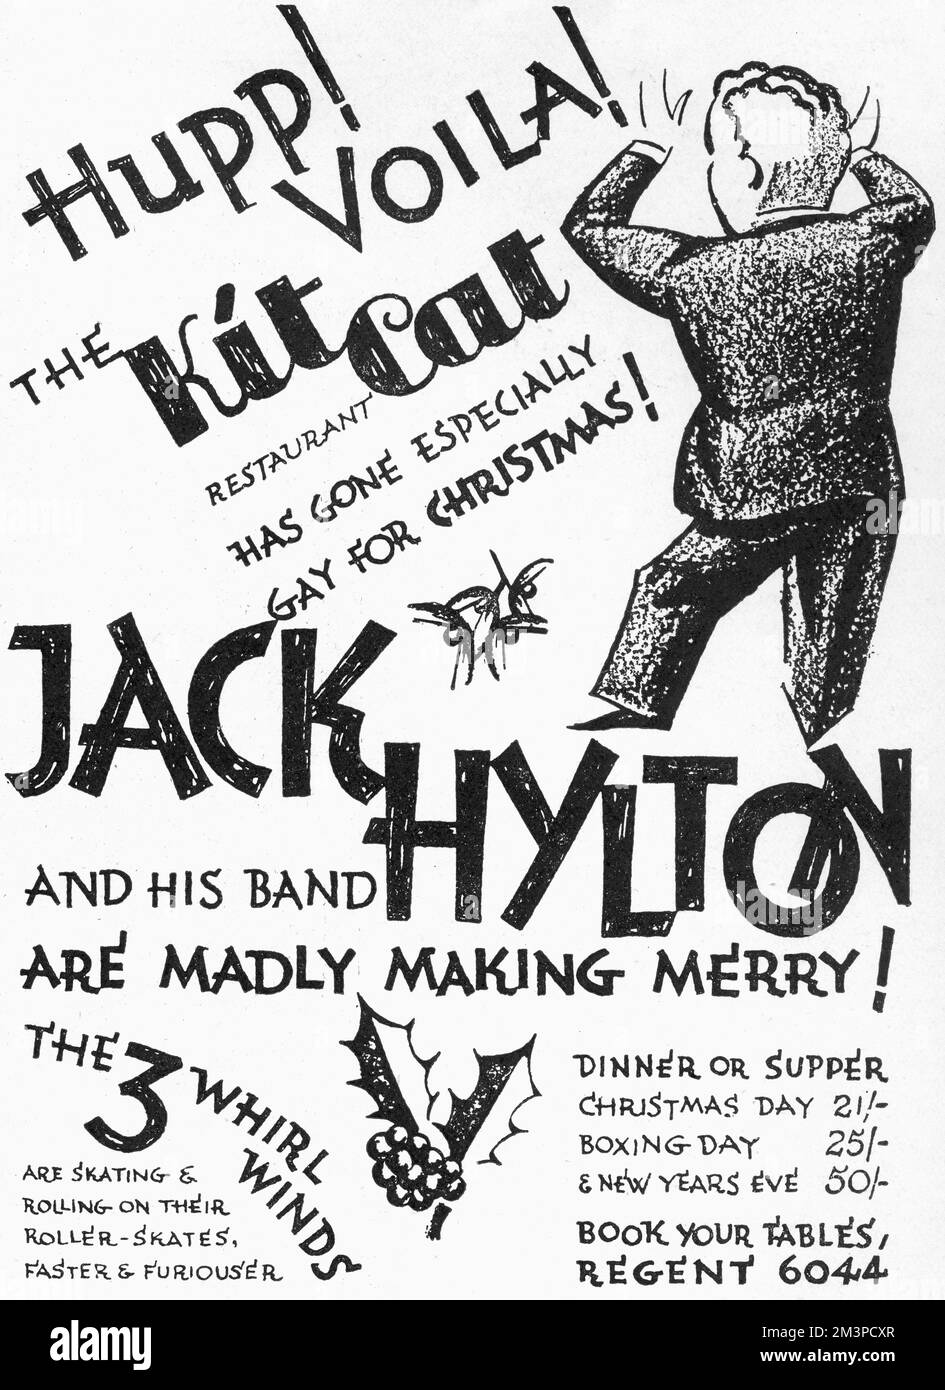 Advertisement for the Kit-Cat restaurant in London for the Christmas period of 1929, featuring the famous Jack Hylton and his band as entertainment as well as the intriguing sounding 3 Whirlwinds, who 'are skating and rolling on their roller-skates, faster and furiouser'!       Date: 1929 Stock Photo